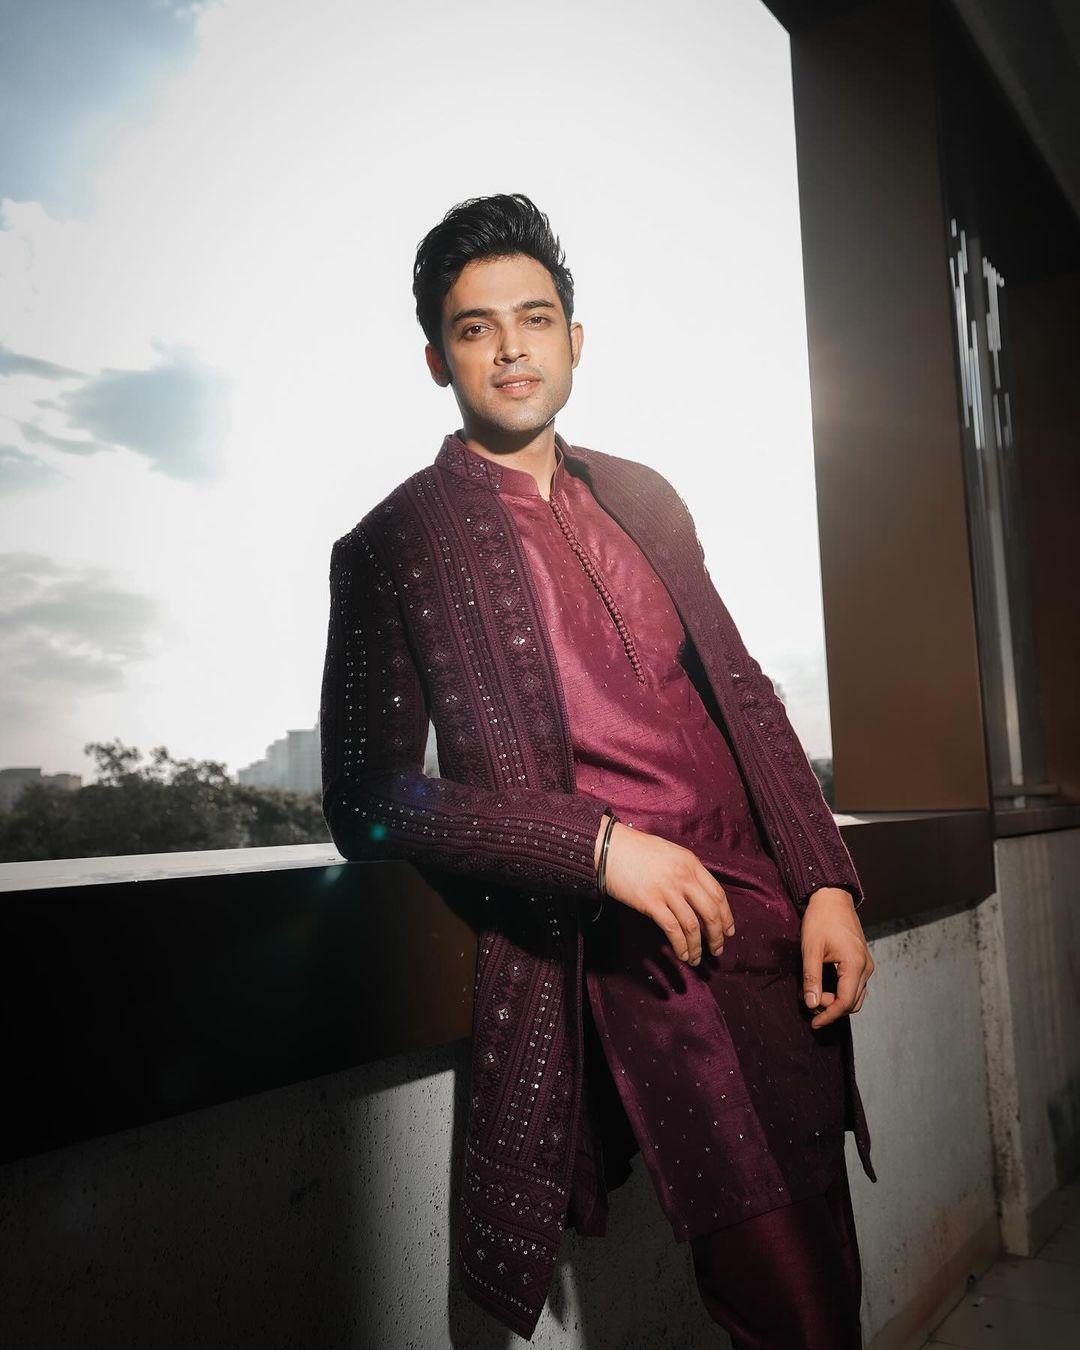 Holika Dahan pooja is approaching, and we are sure many of you will be struggling to find the best fit for the day. In this look, Parth opted for a stylish kurta and paired it with matching pants. The actor added an intricate sherwani on the kurta, which made his ensemble look even classier